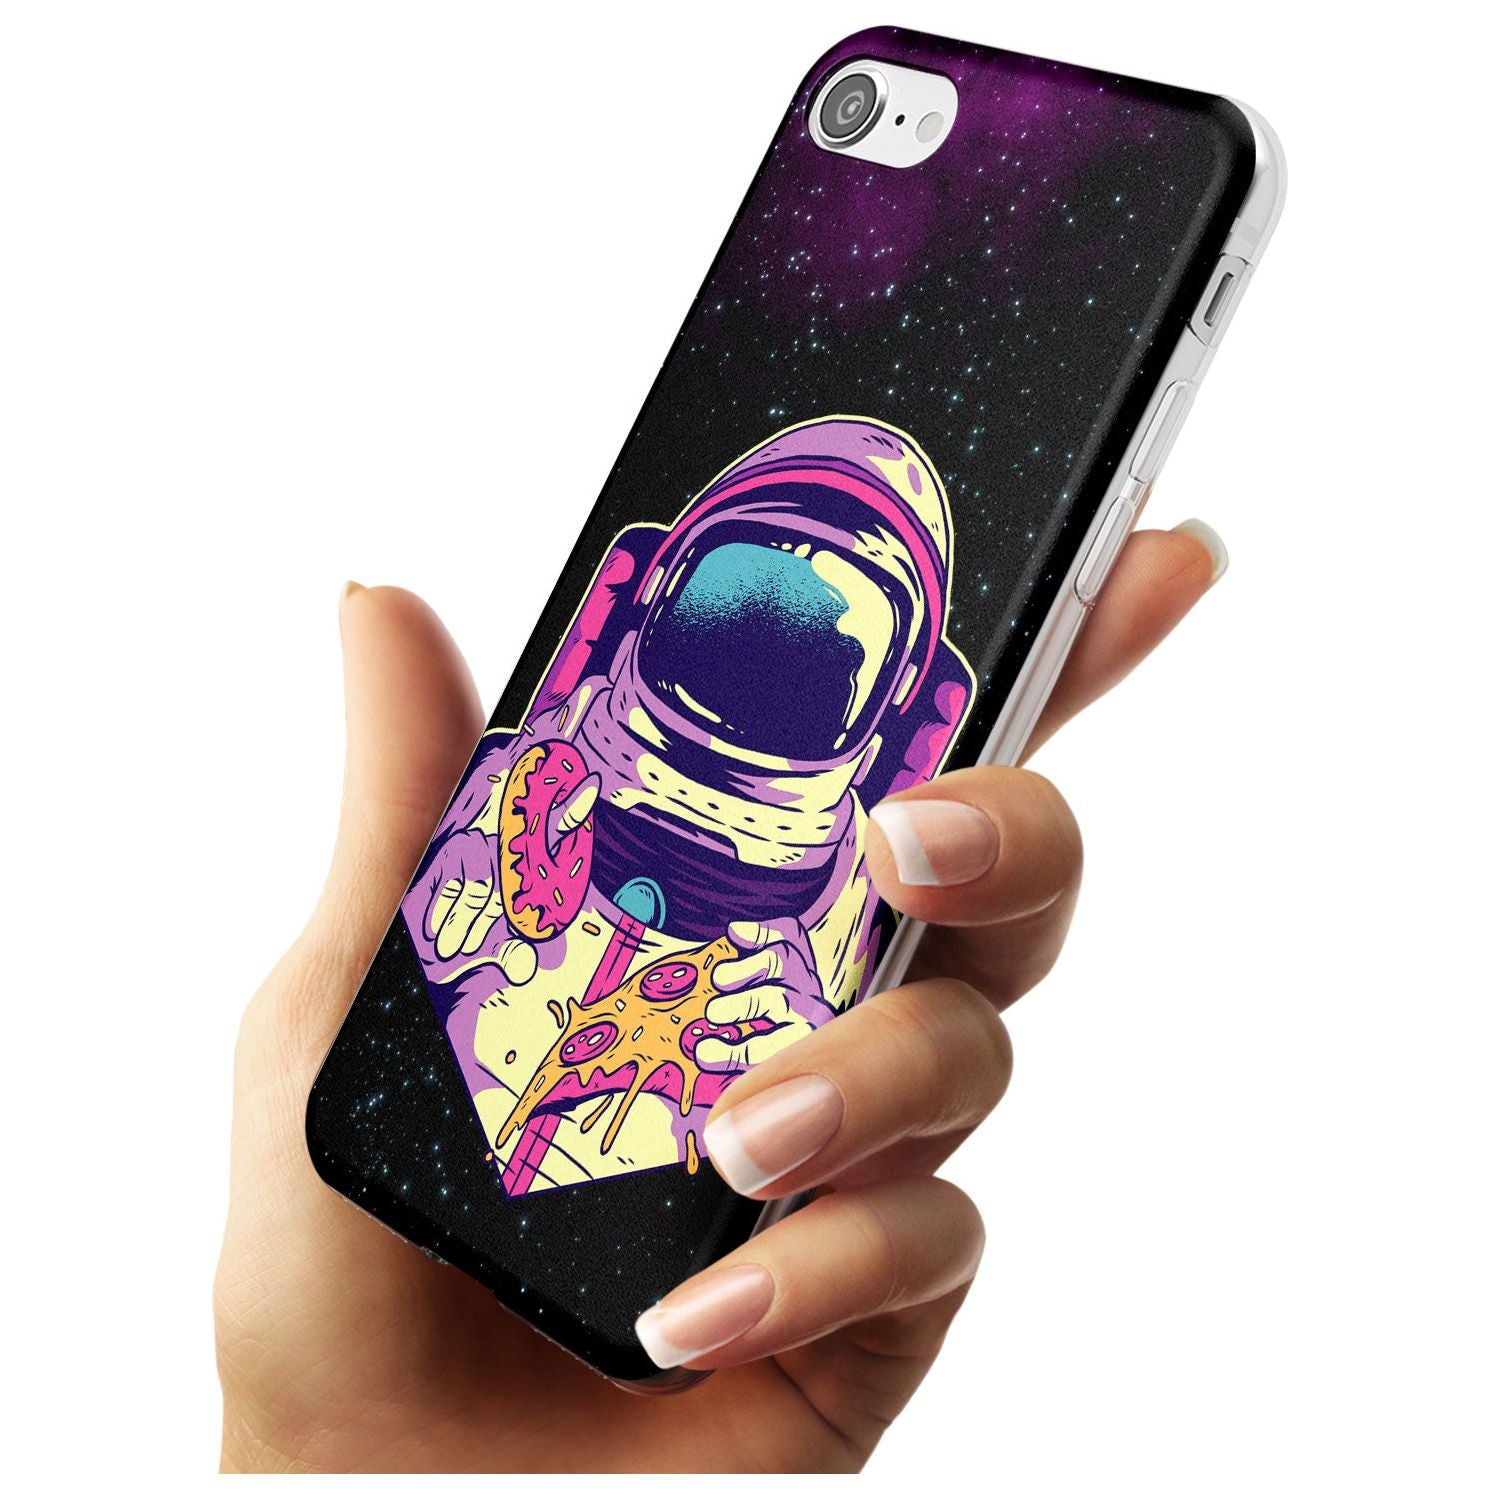 Astro Cheat Meal Slim TPU Phone Case for iPhone SE 8 7 Plus